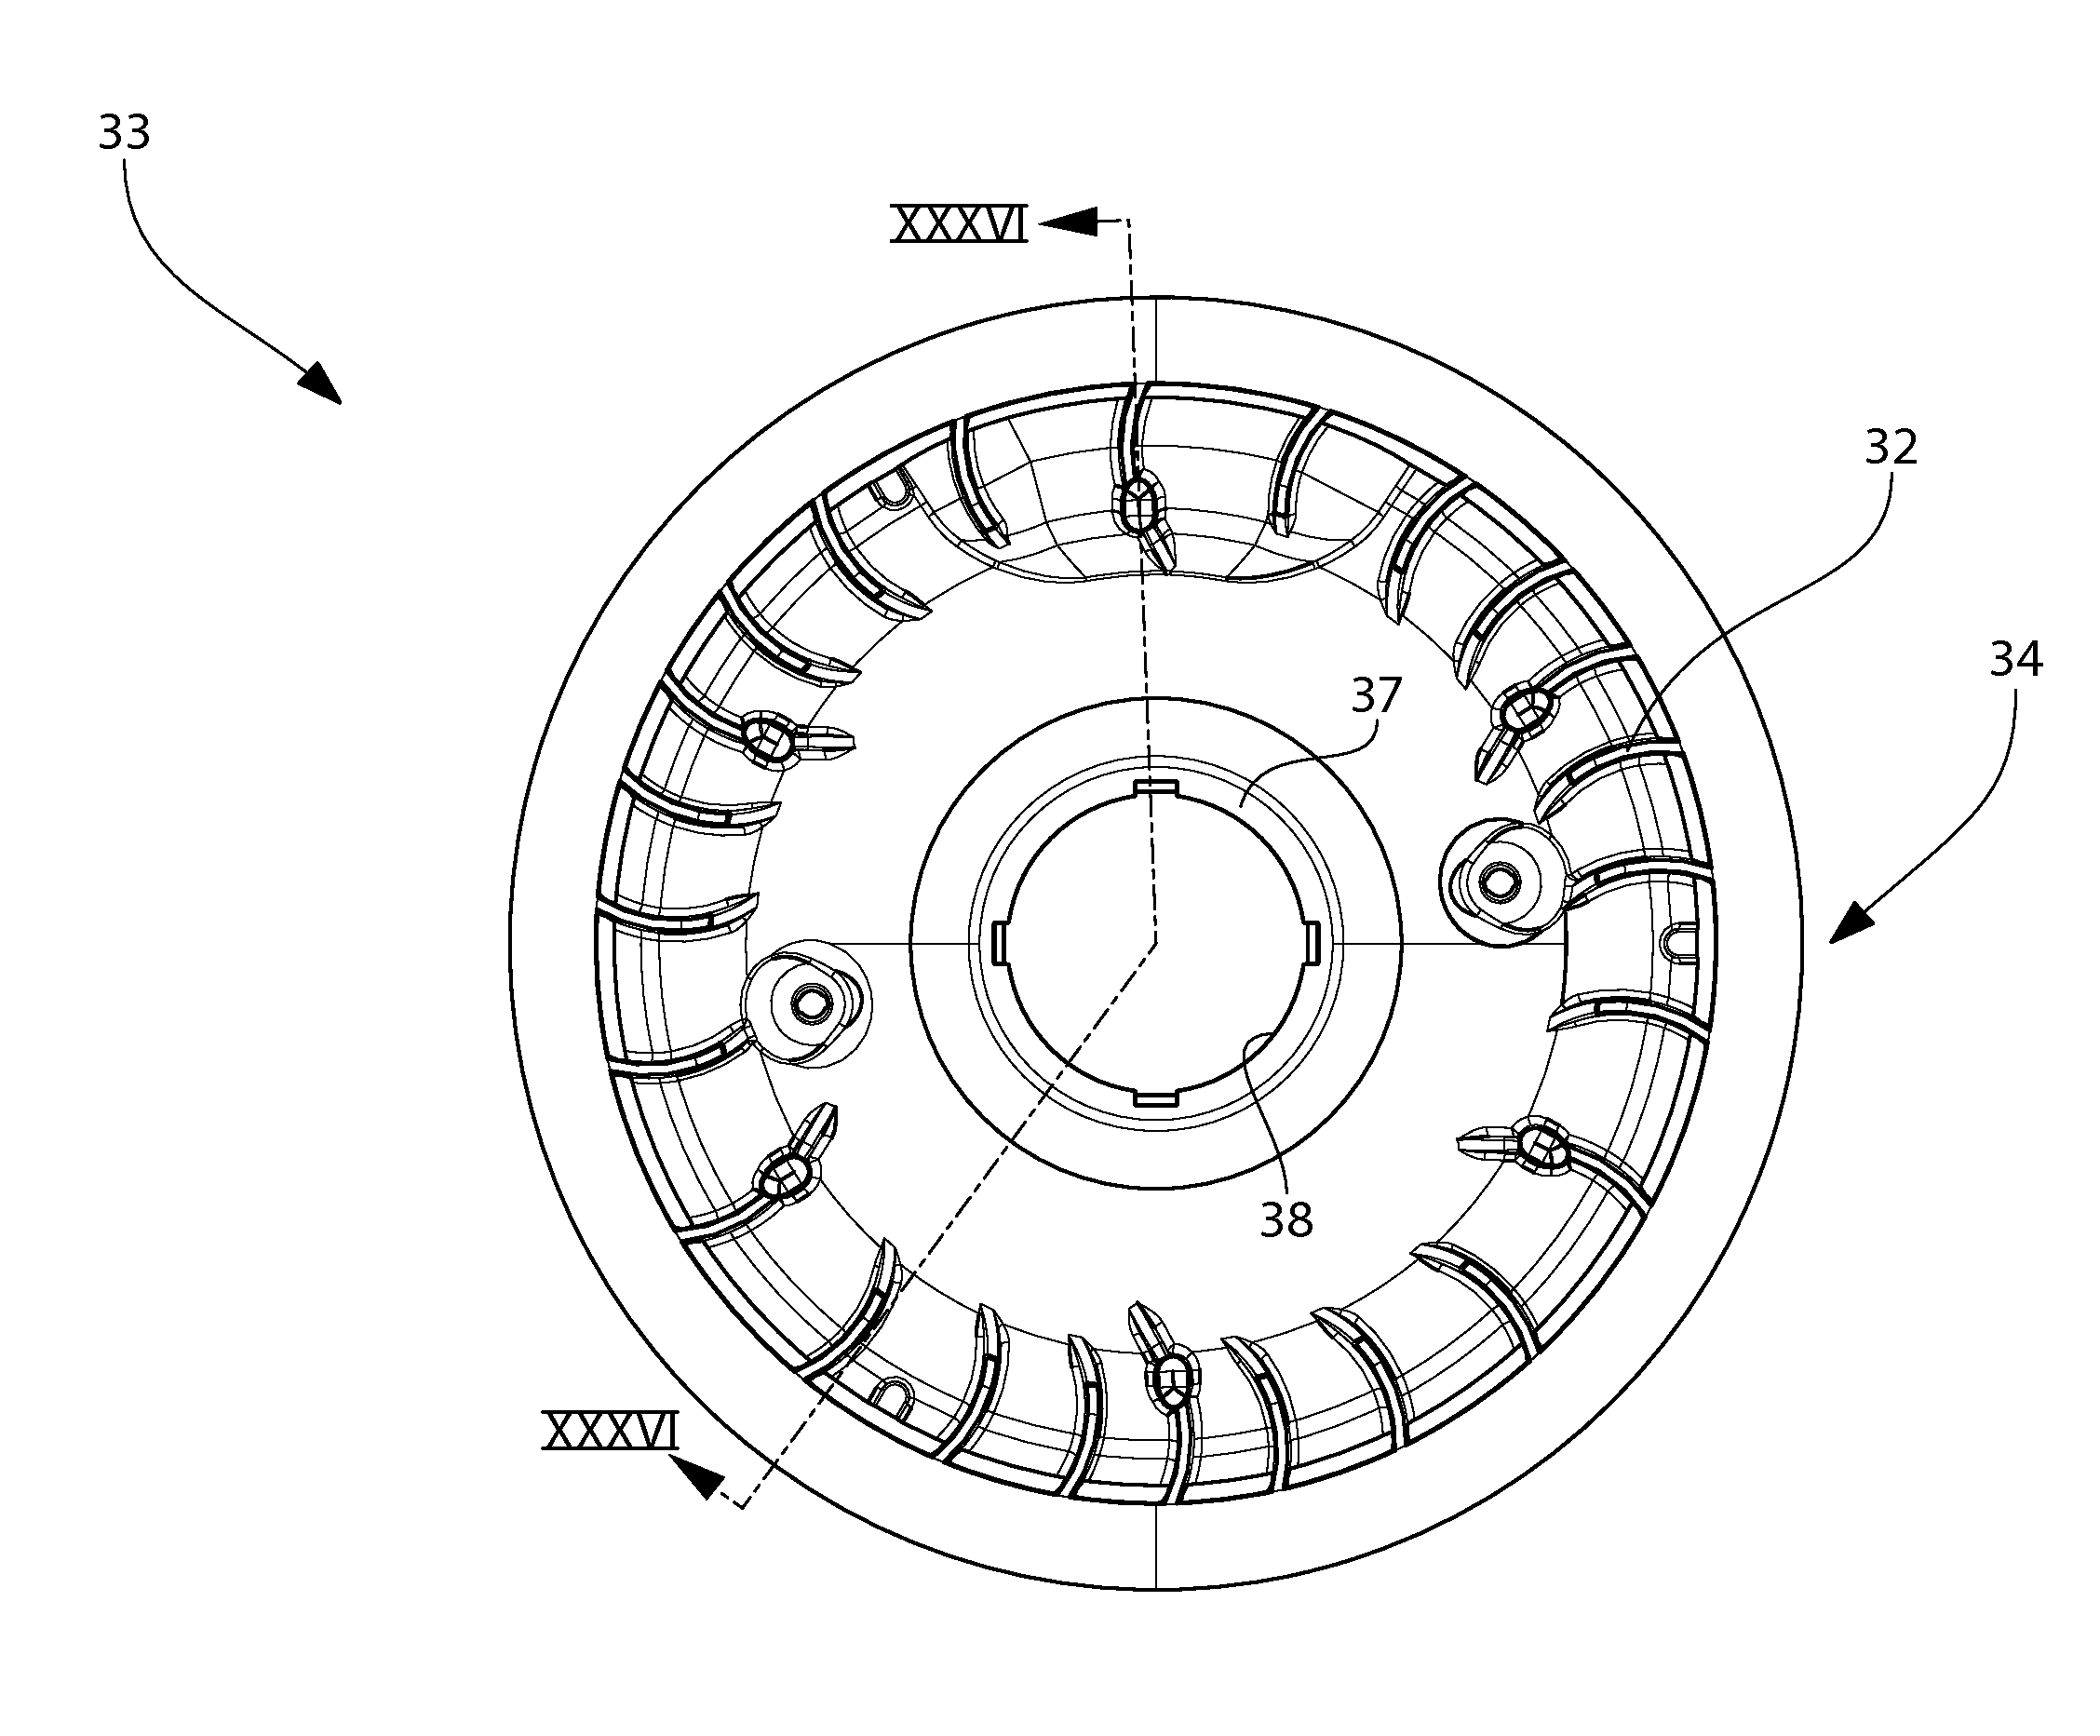 Noise suppression system